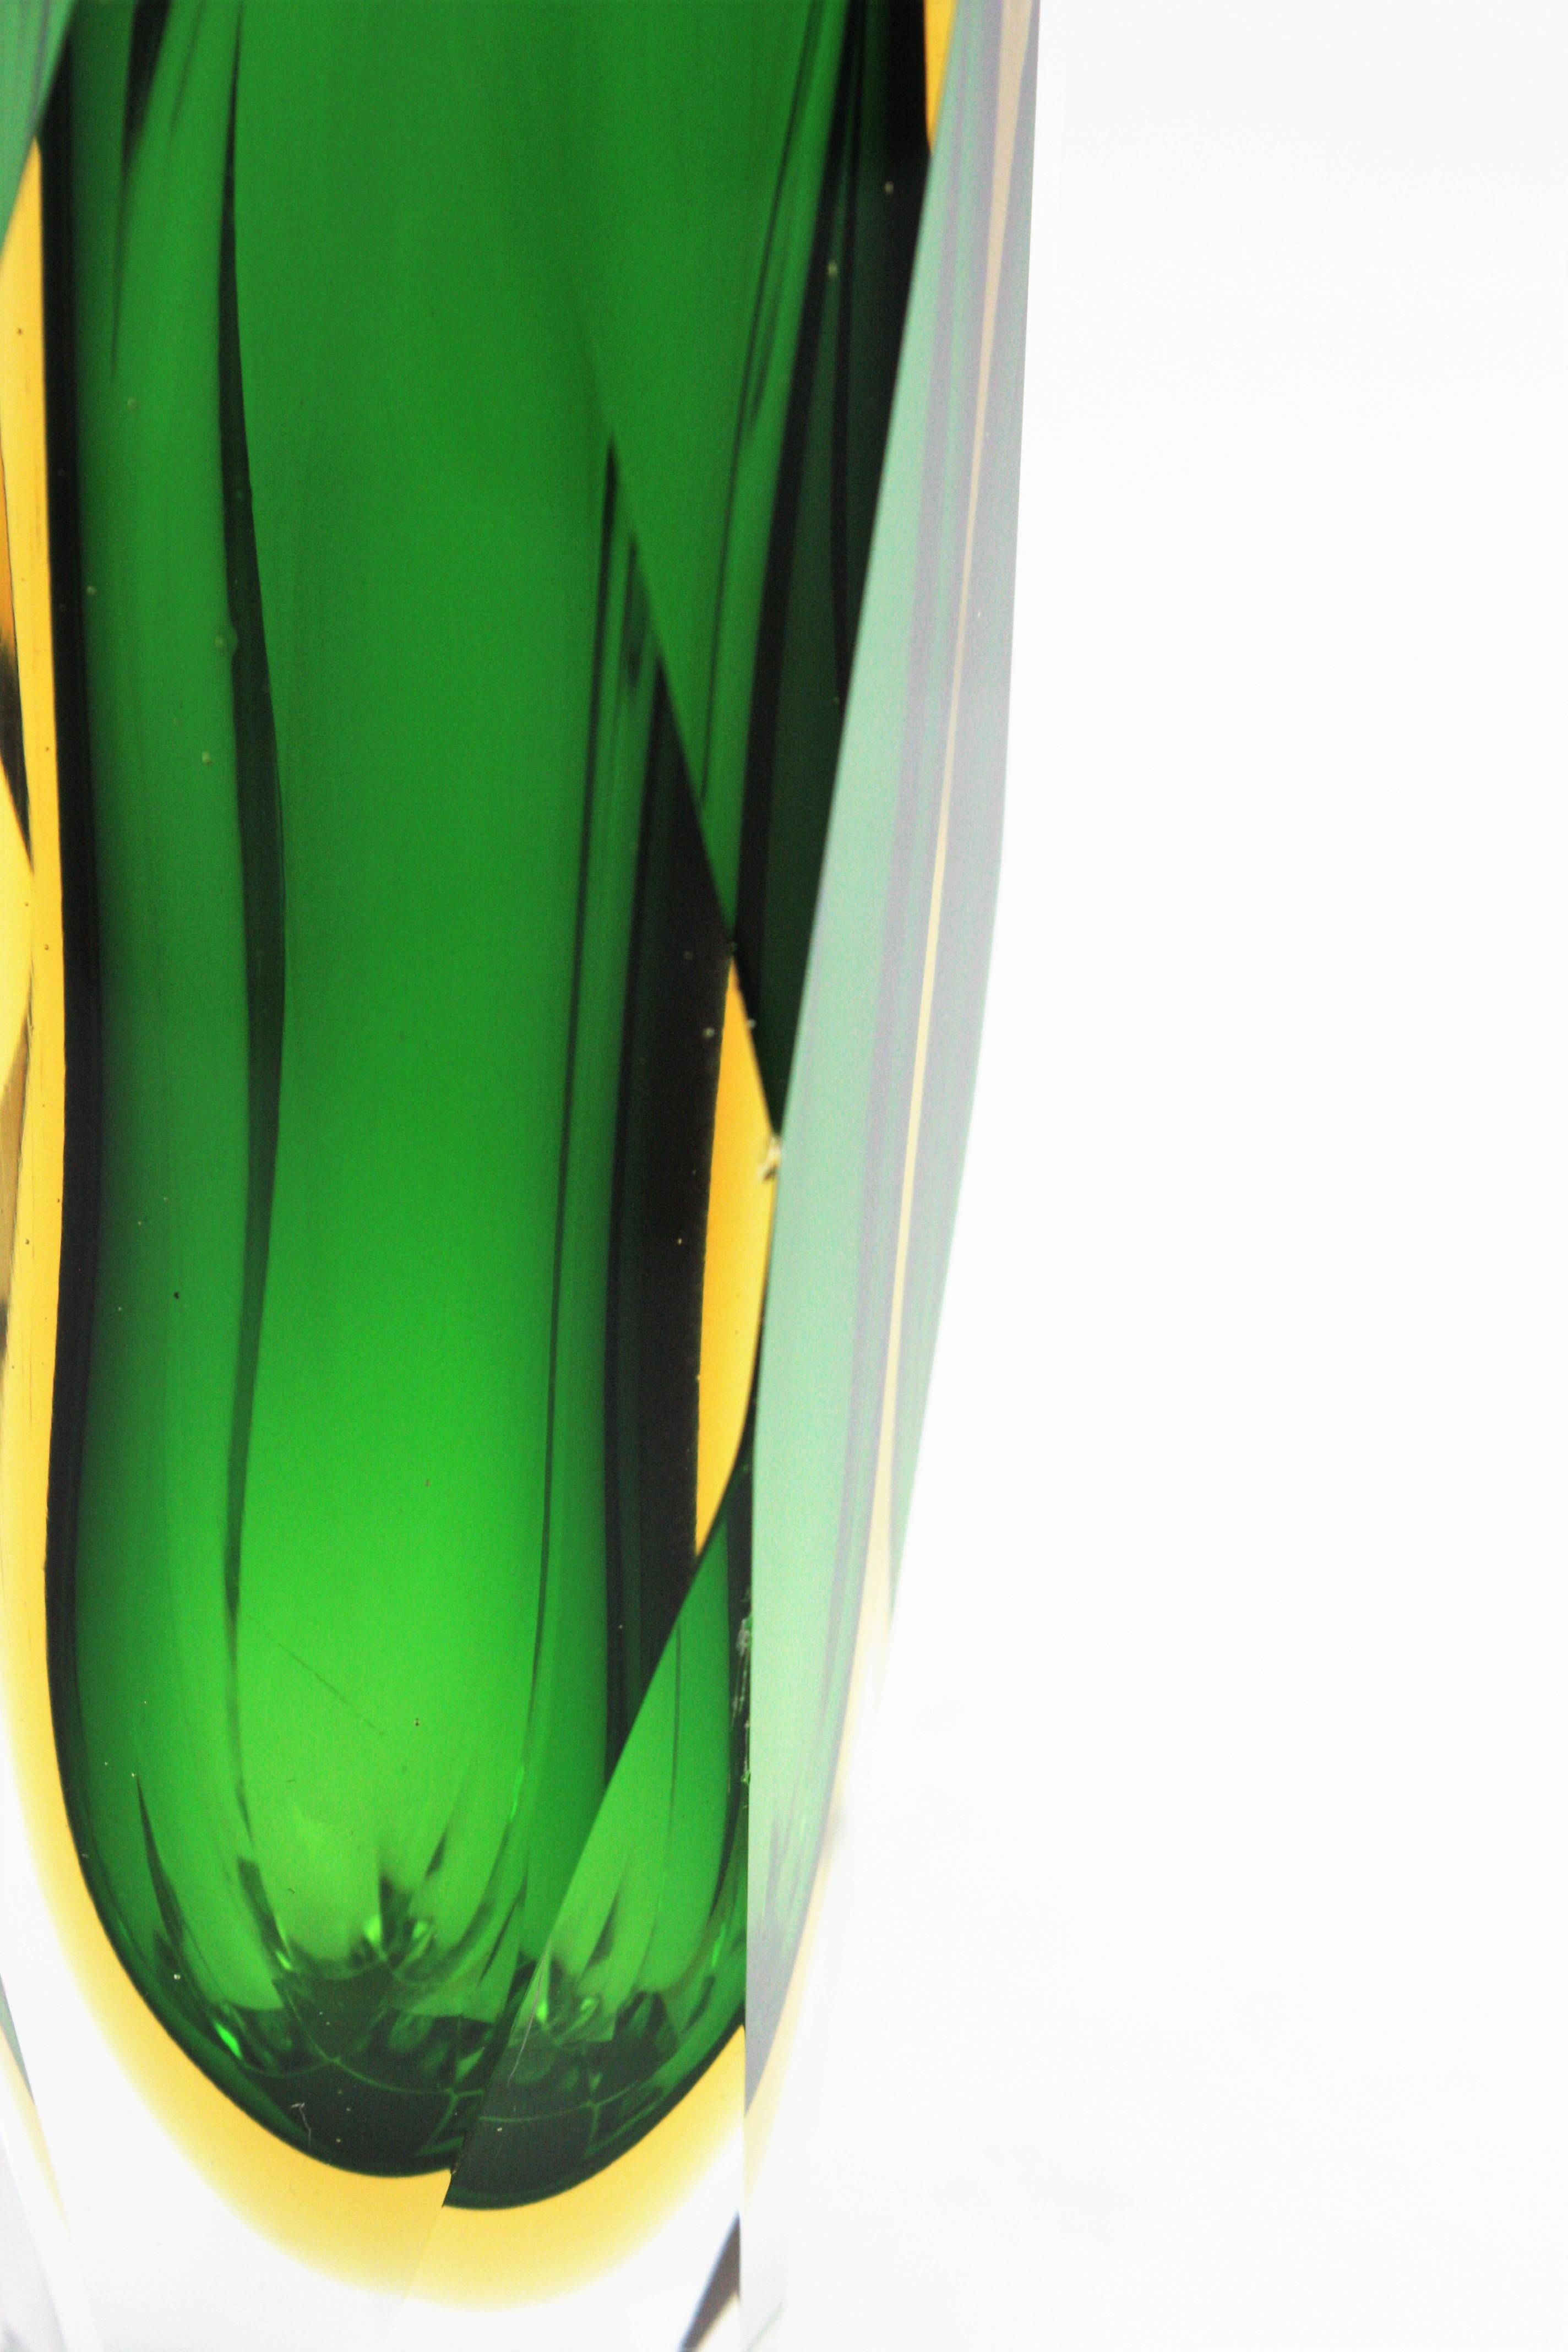 Giant Mandruzzato Murano Sommerso Green Yellow Faceted Art Glass Vase For Sale 2